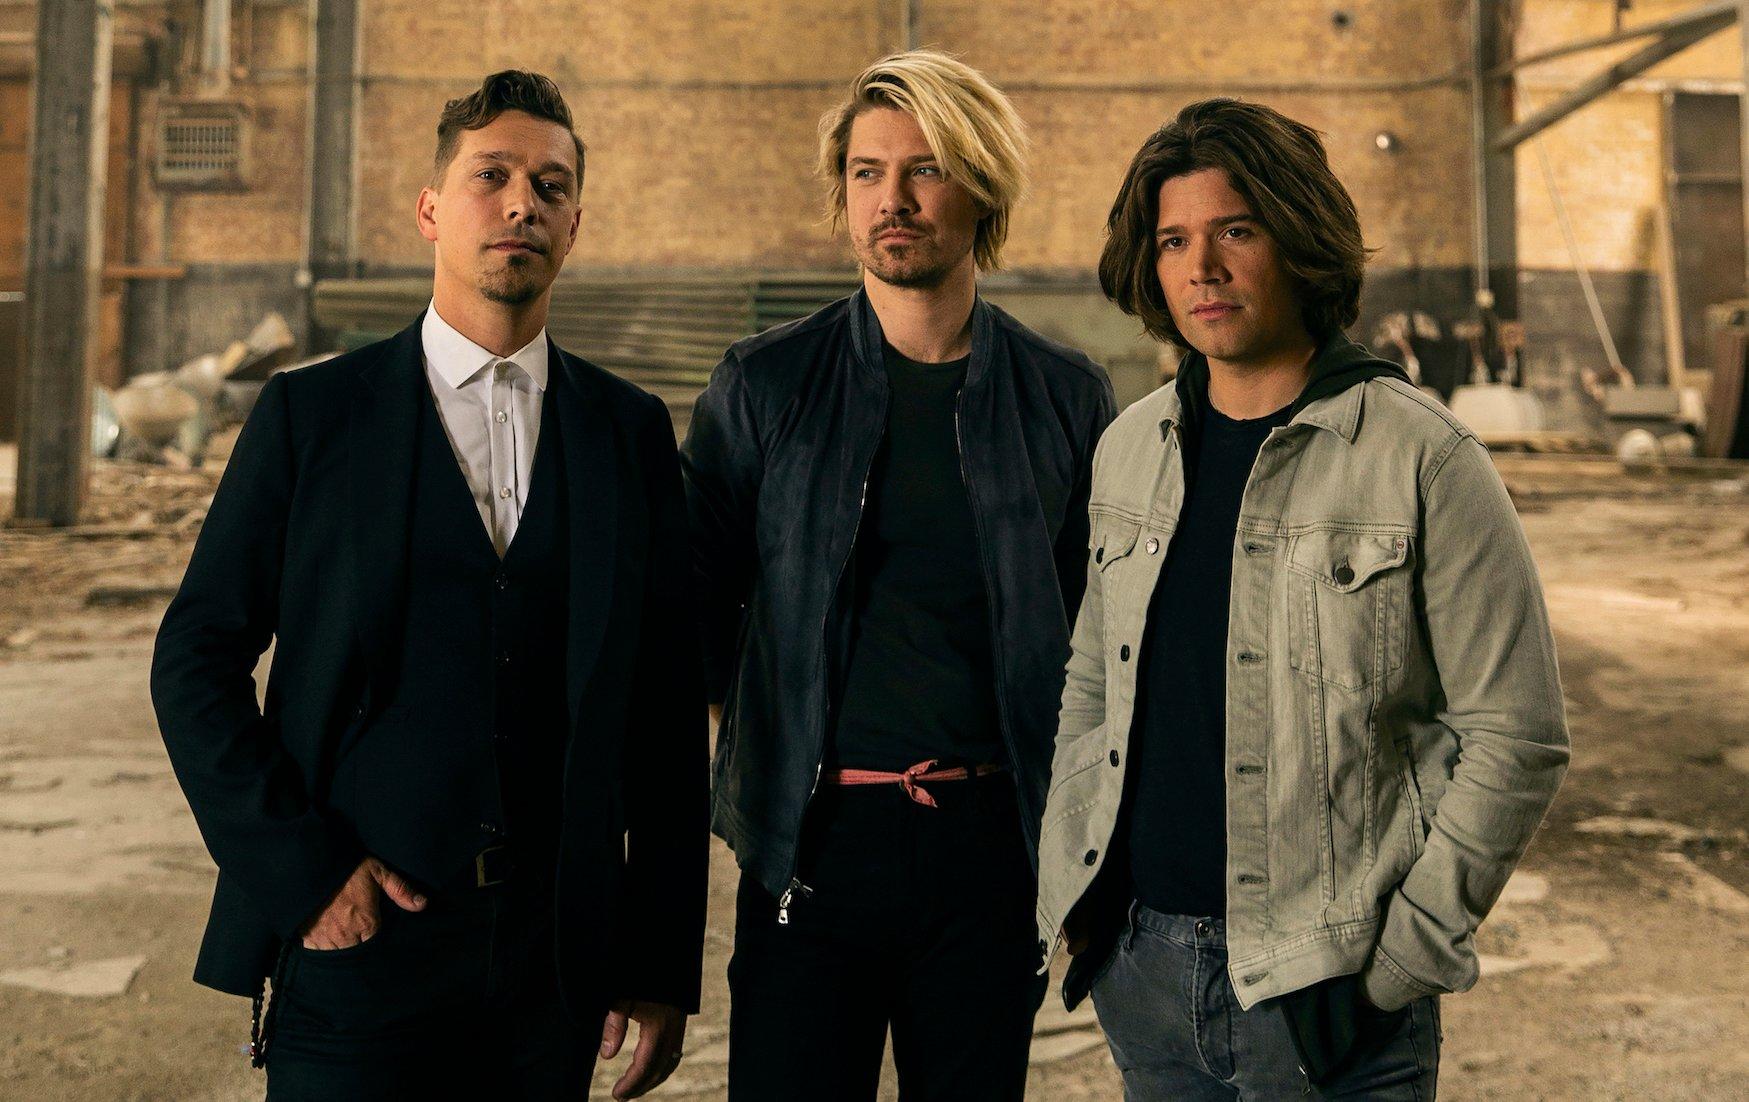 Hanson: People Look At You and Say, 'This Can't Be Real